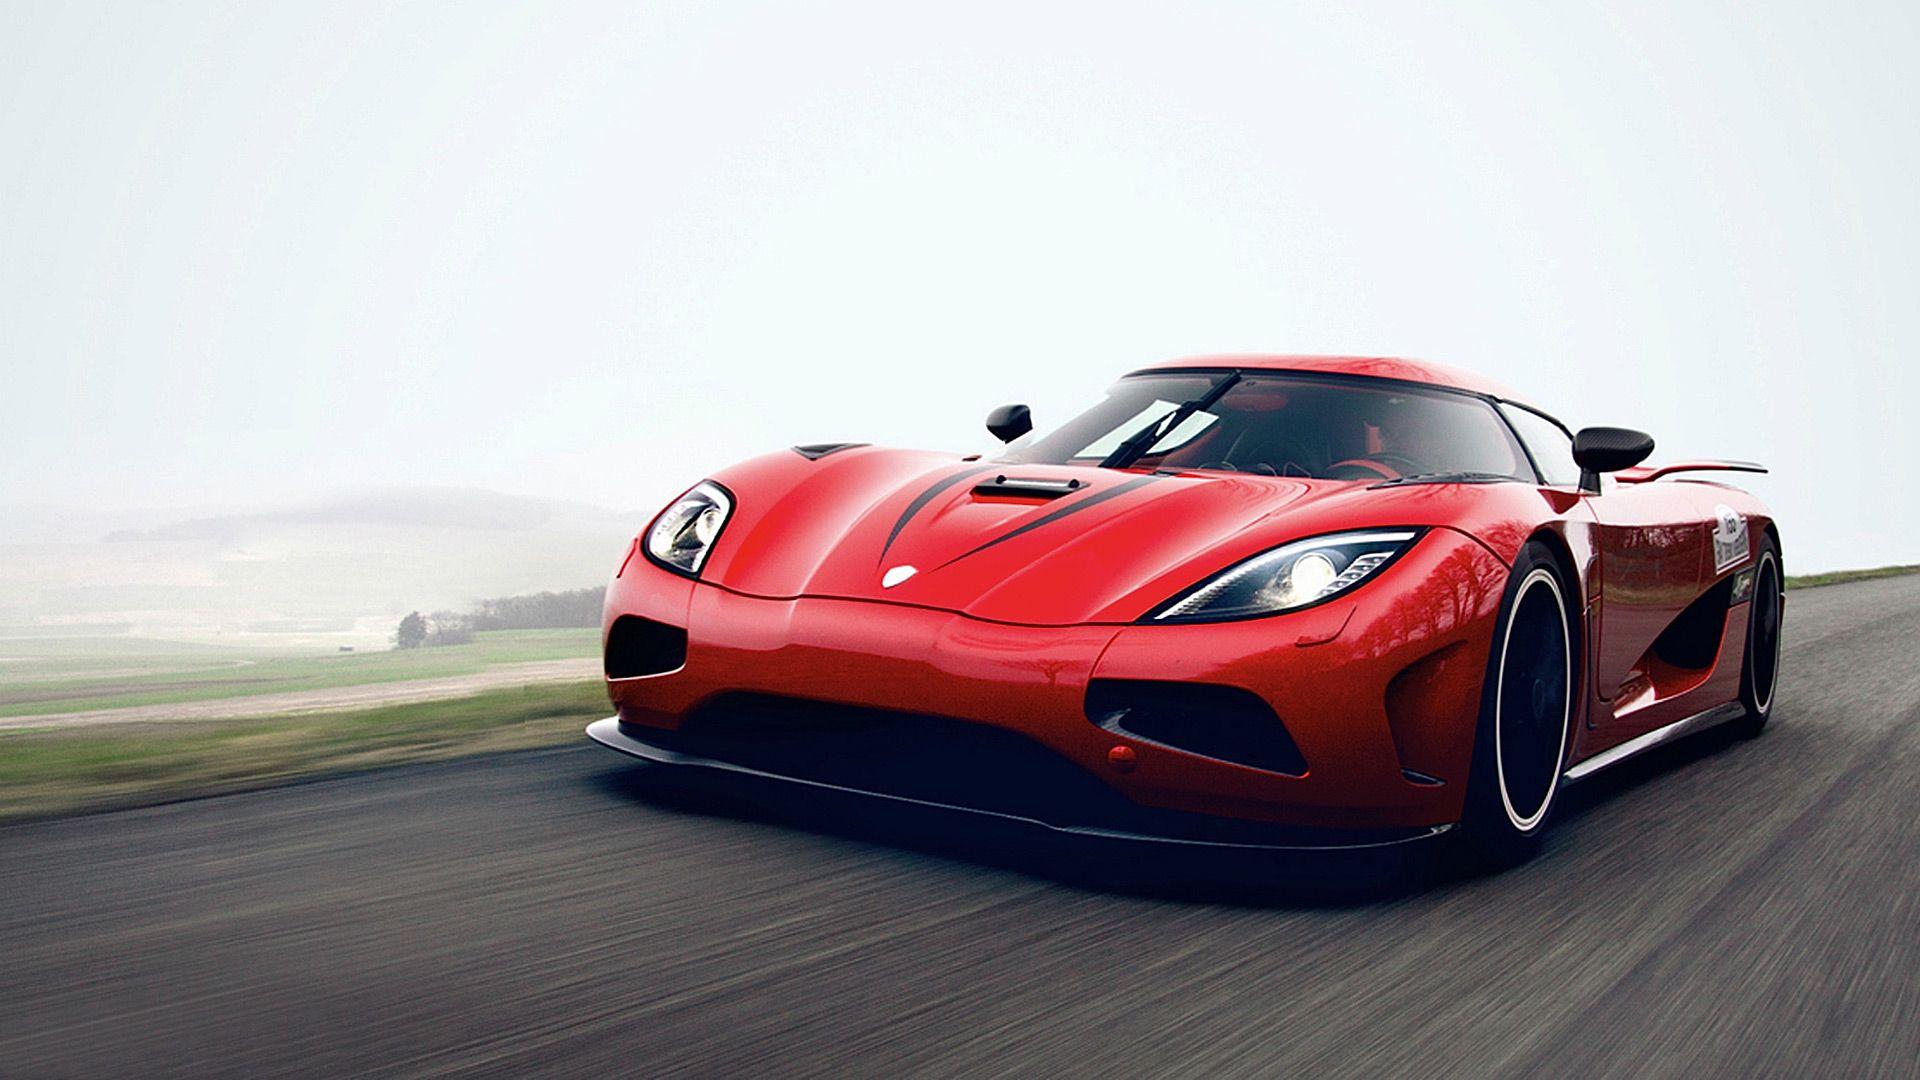 15+ Koenigsegg Agera R In Red Cool Wallpaper free download